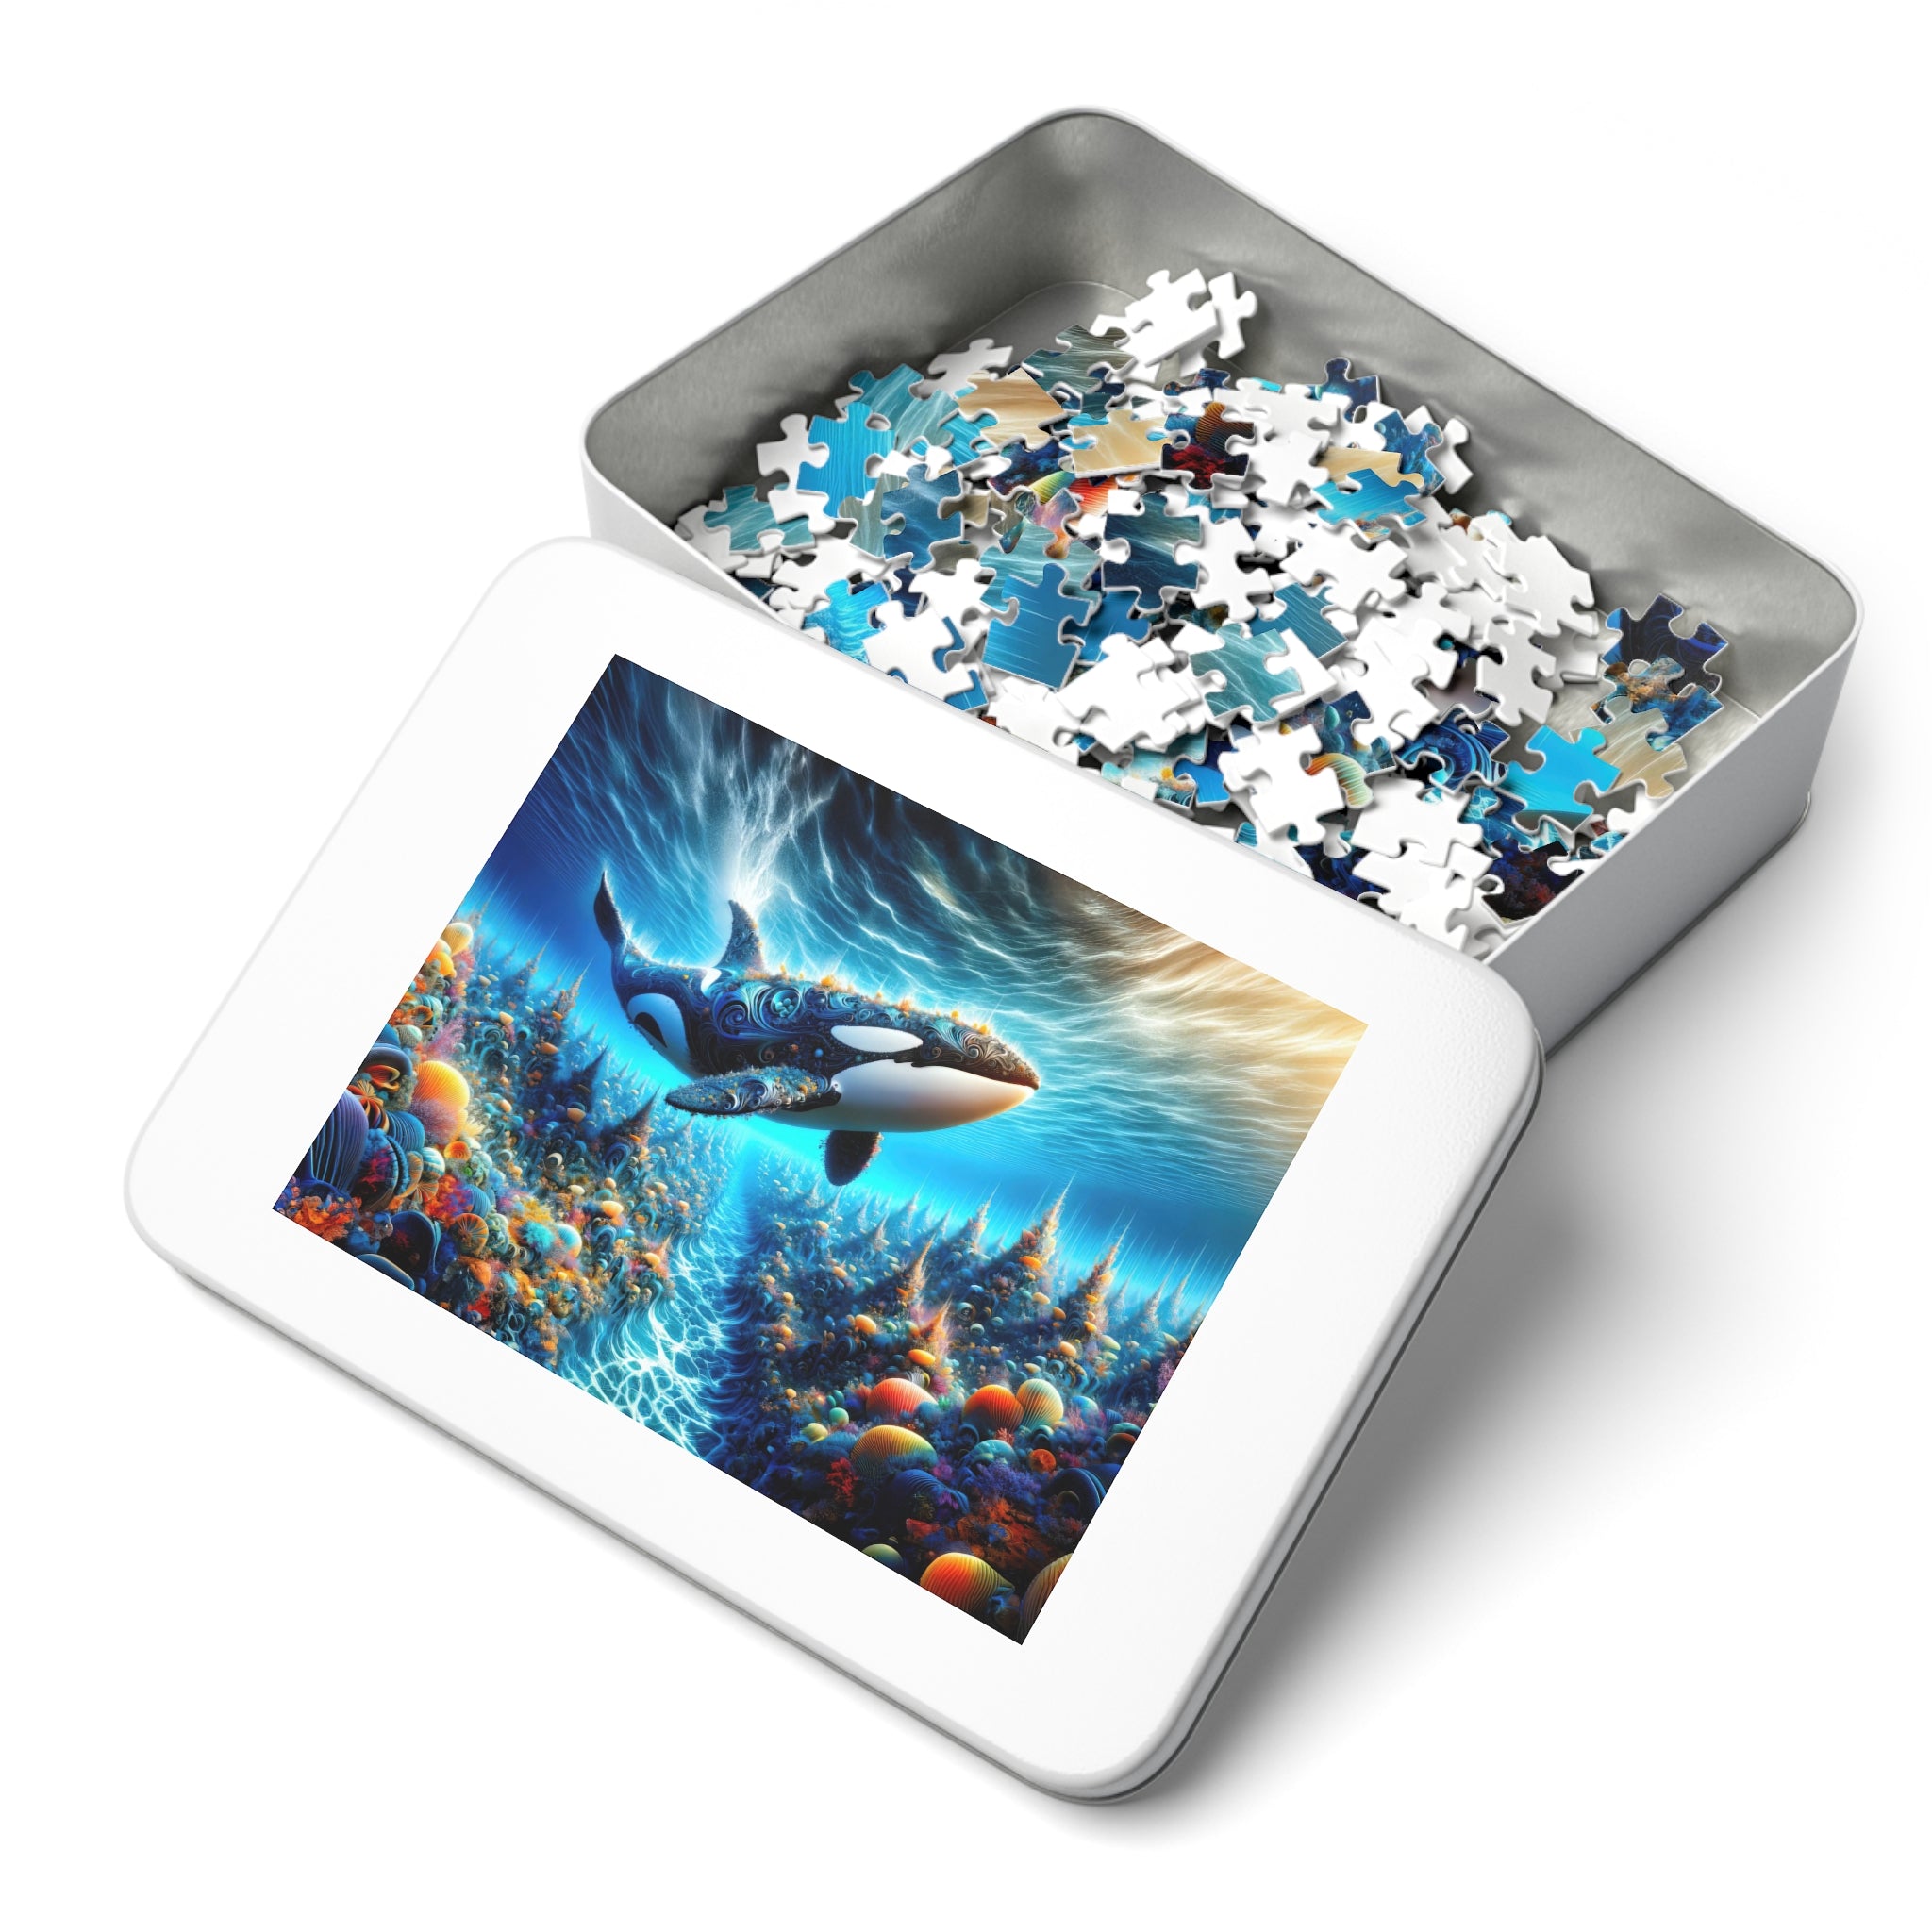 The Oracle of the Oceanic Opus Jigsaw Puzzle